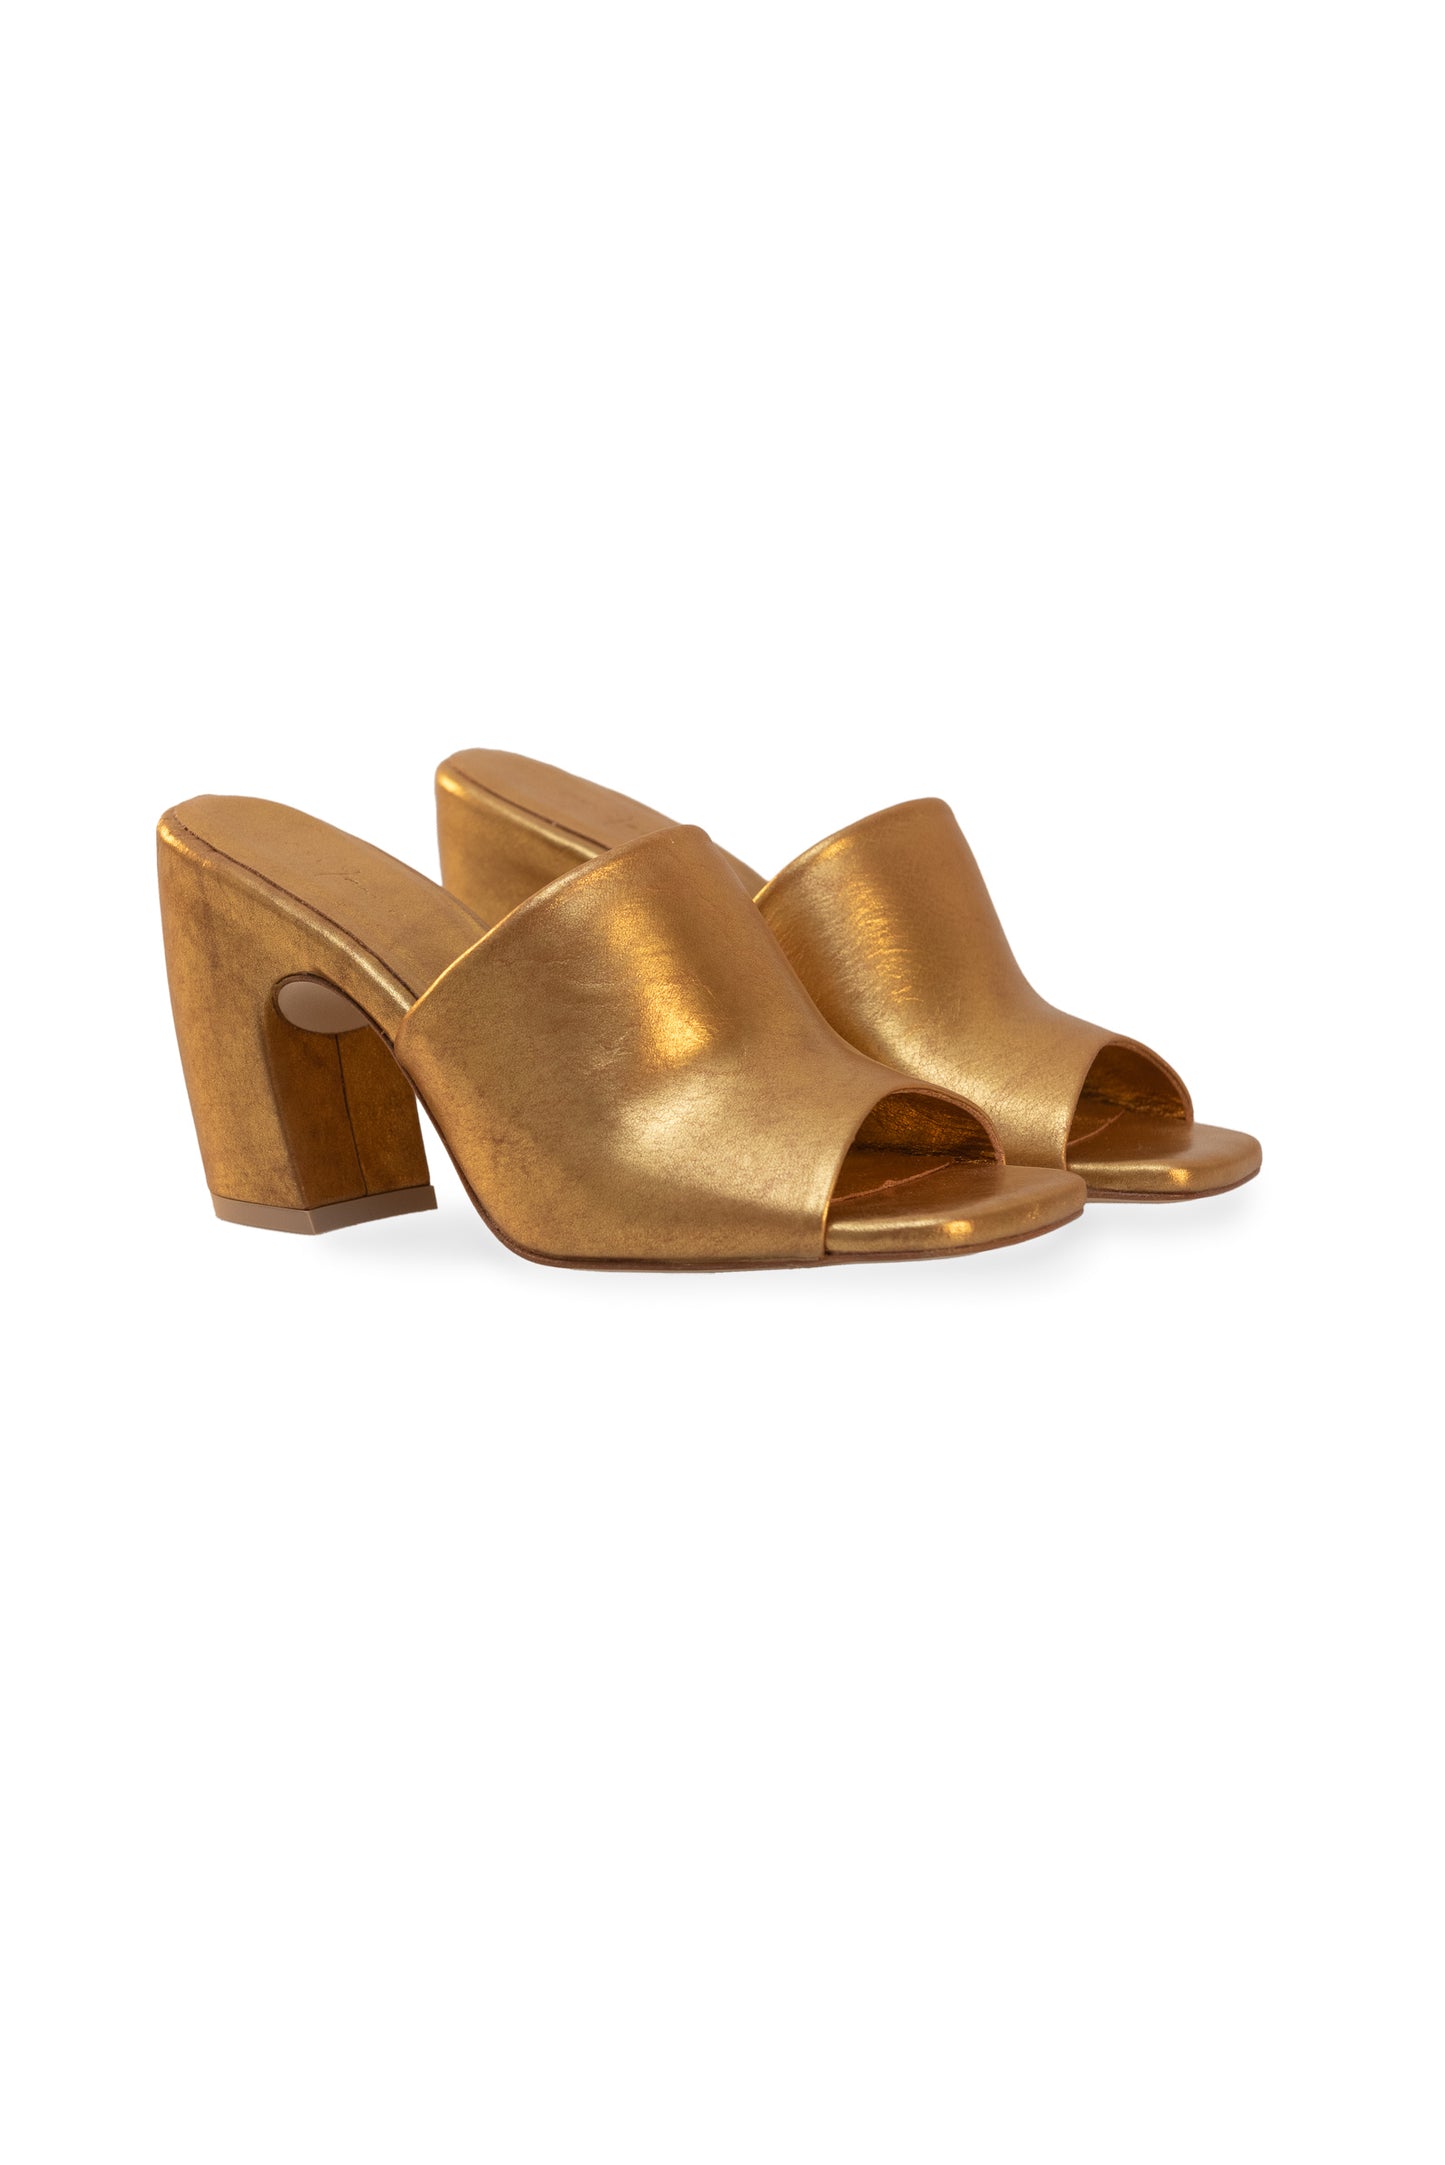 Janis, gold mules